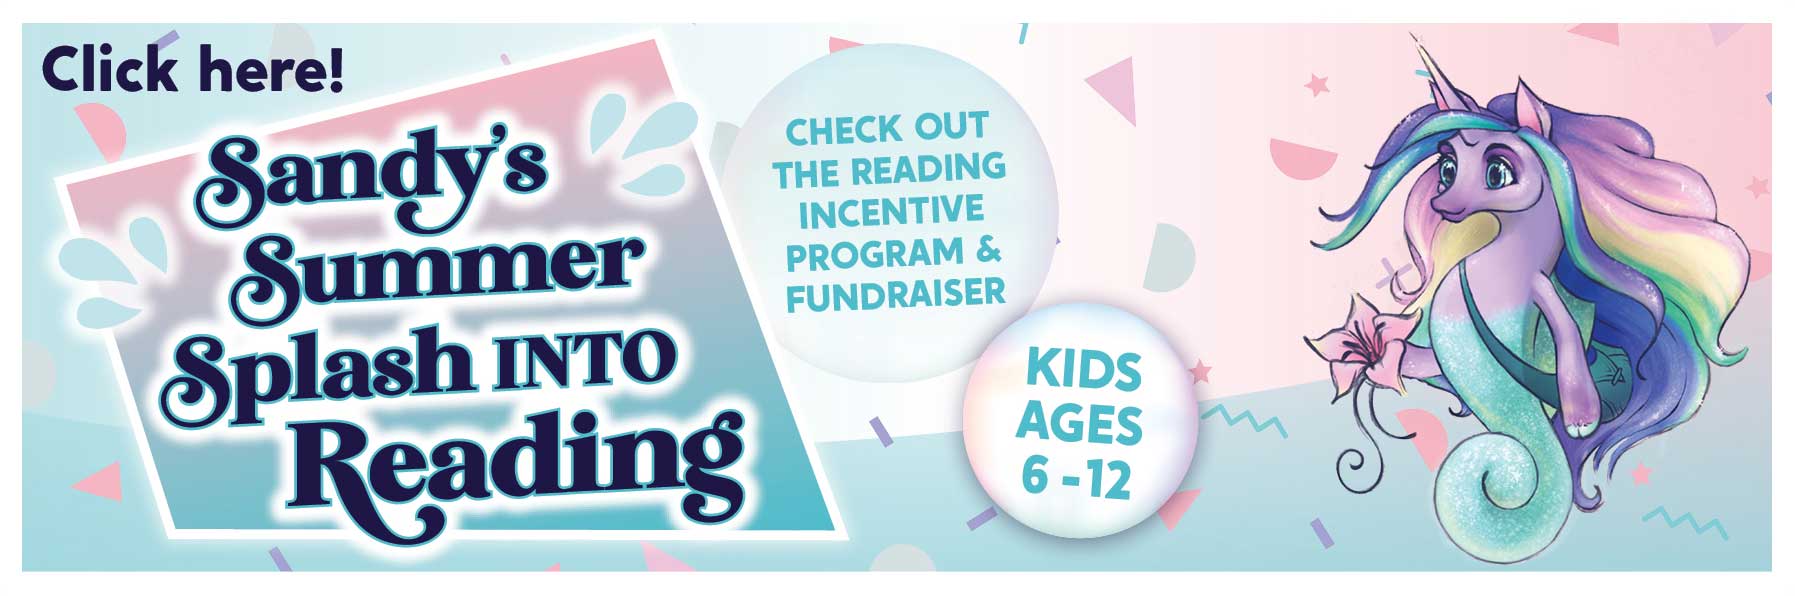 Click here for info on Sandy's Summer Splash Into Reading - Incentive Program and Fundraiser 